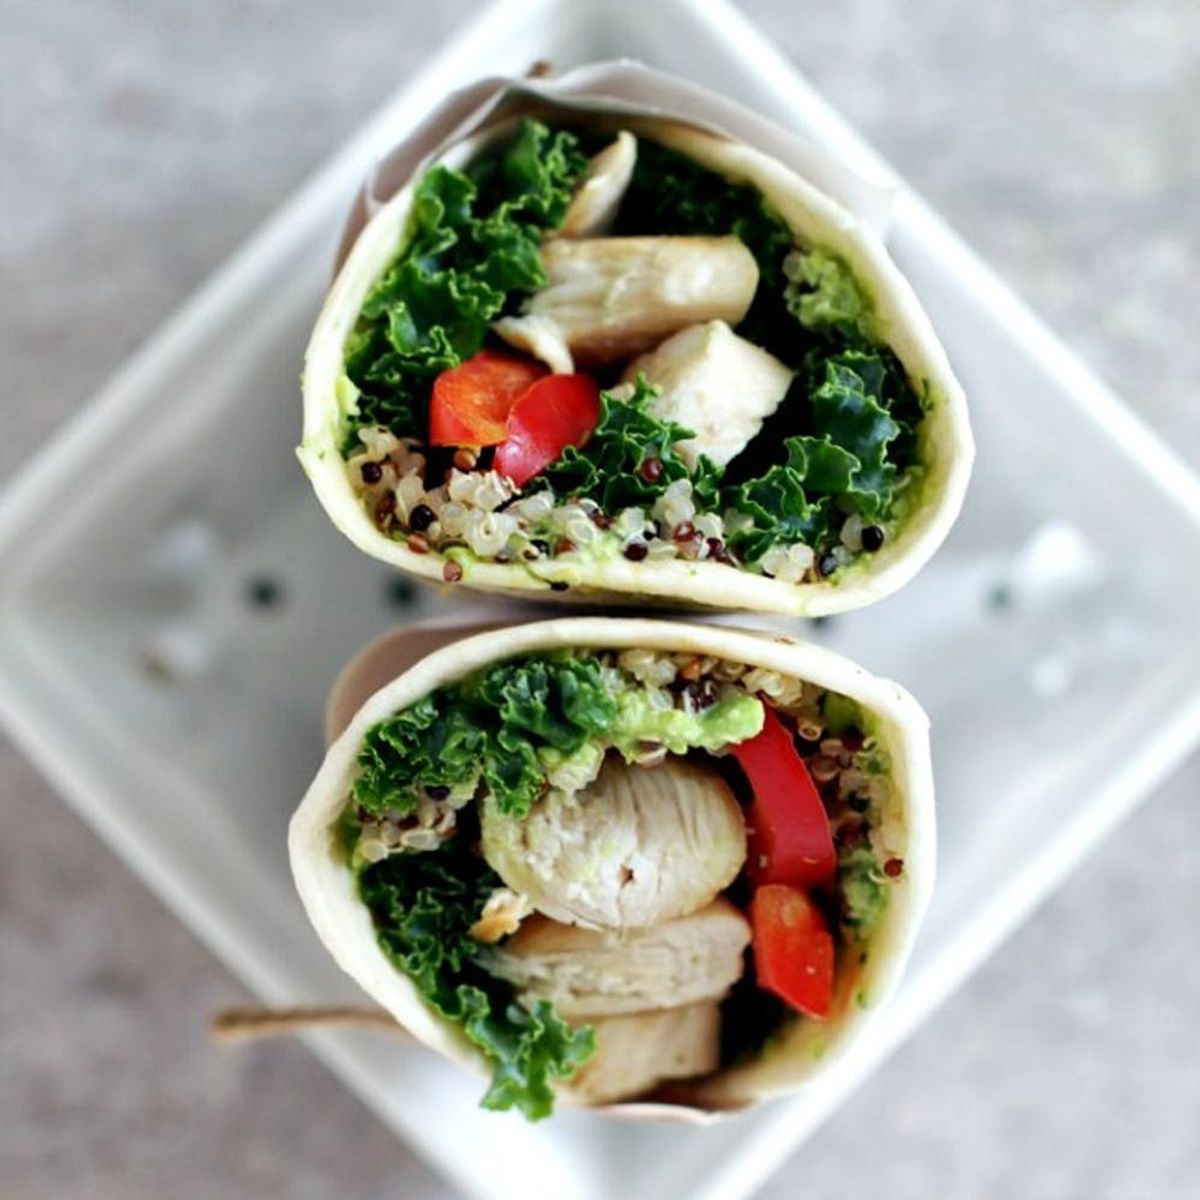 17 Hearty Fiber-Filled Lunch Recipes to Keep You Full Until Dinner